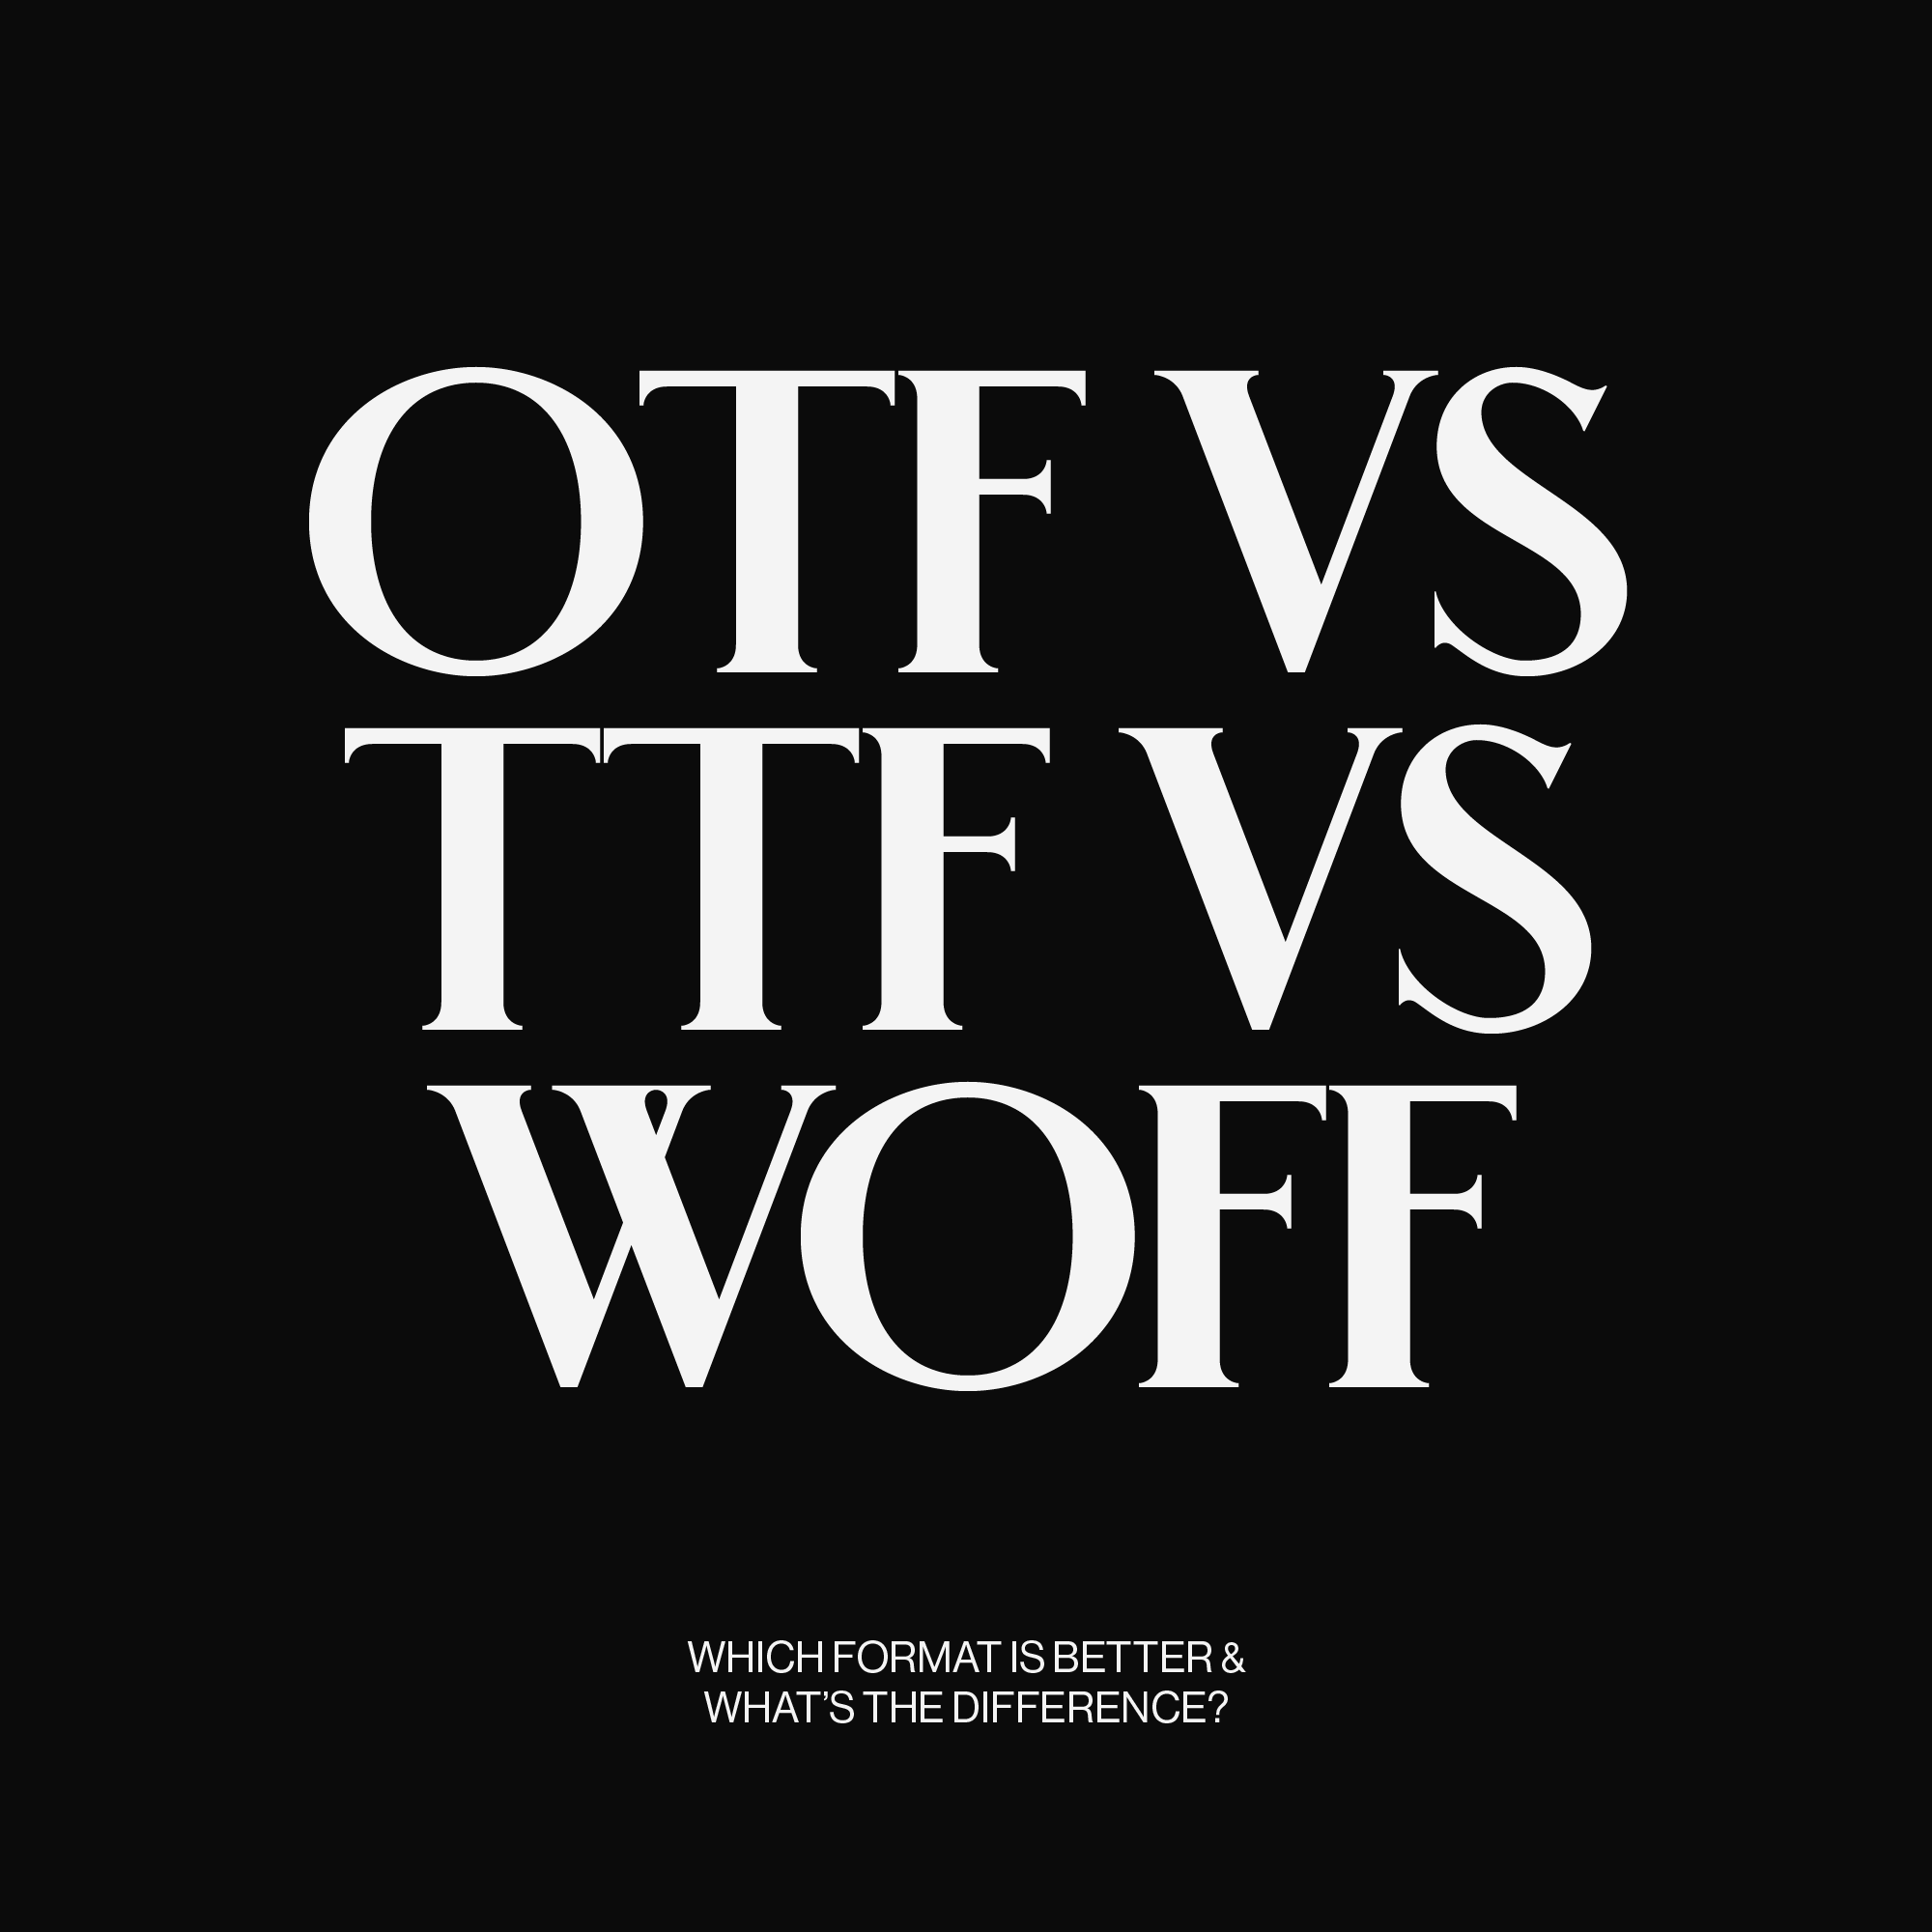 Different Font File Types Explained (OTF, TTF, WOFF)